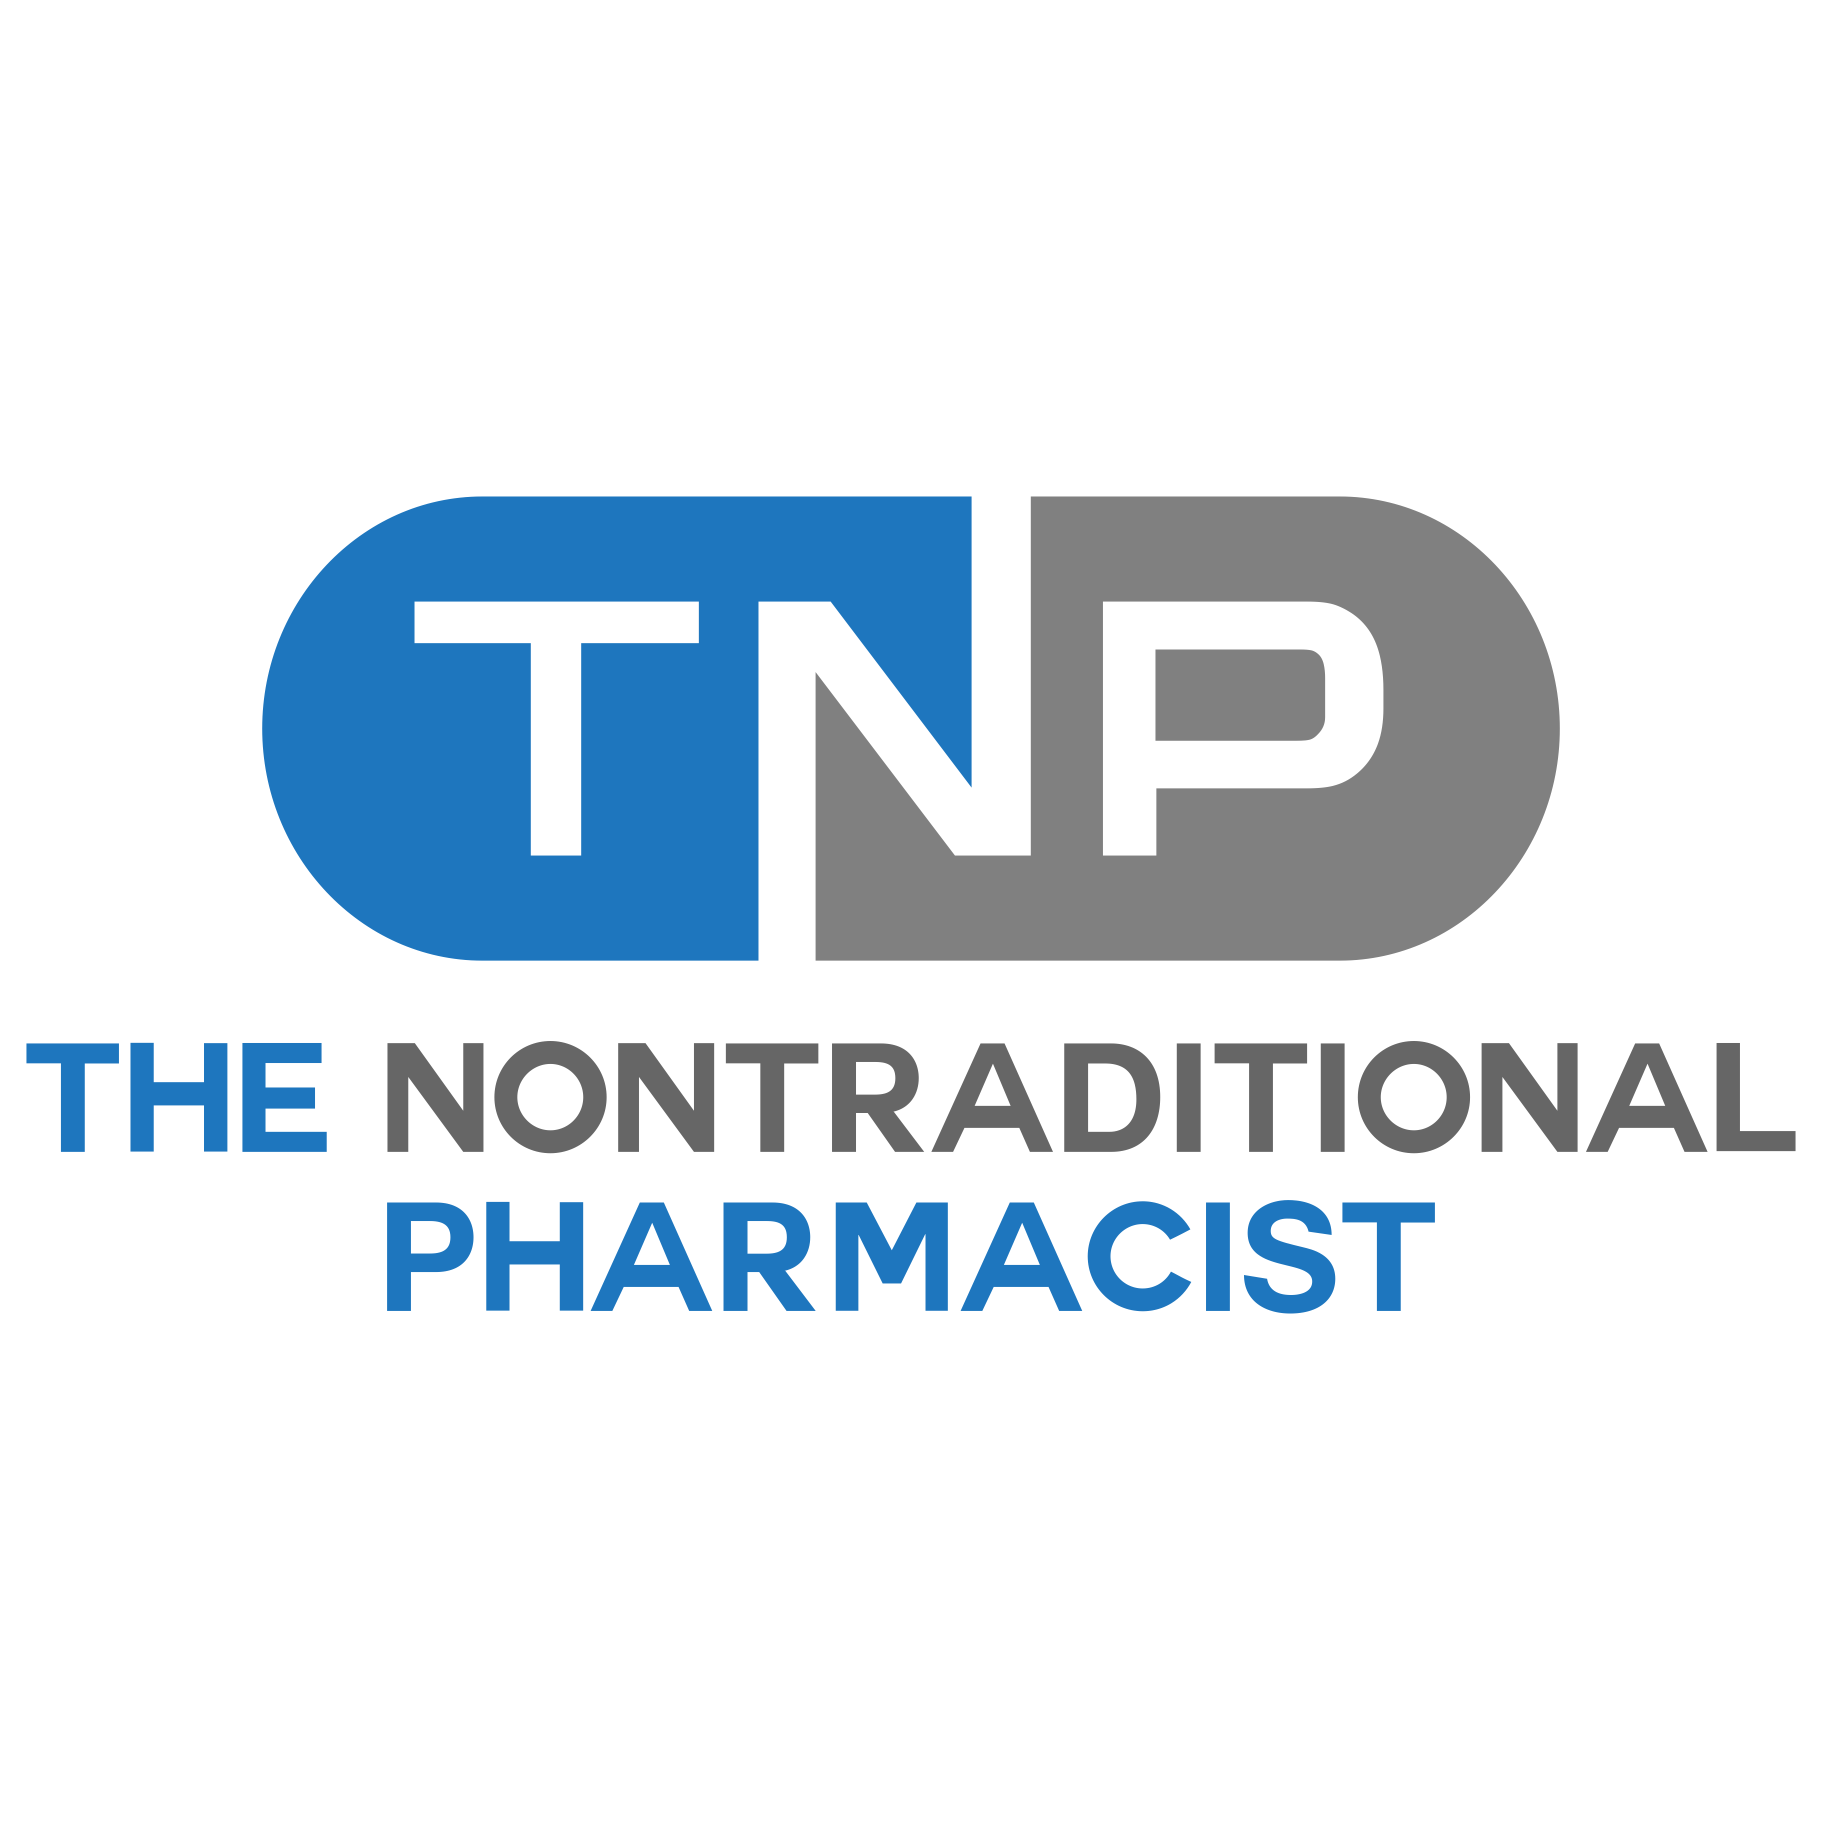 The Nontraditional Pharmacist